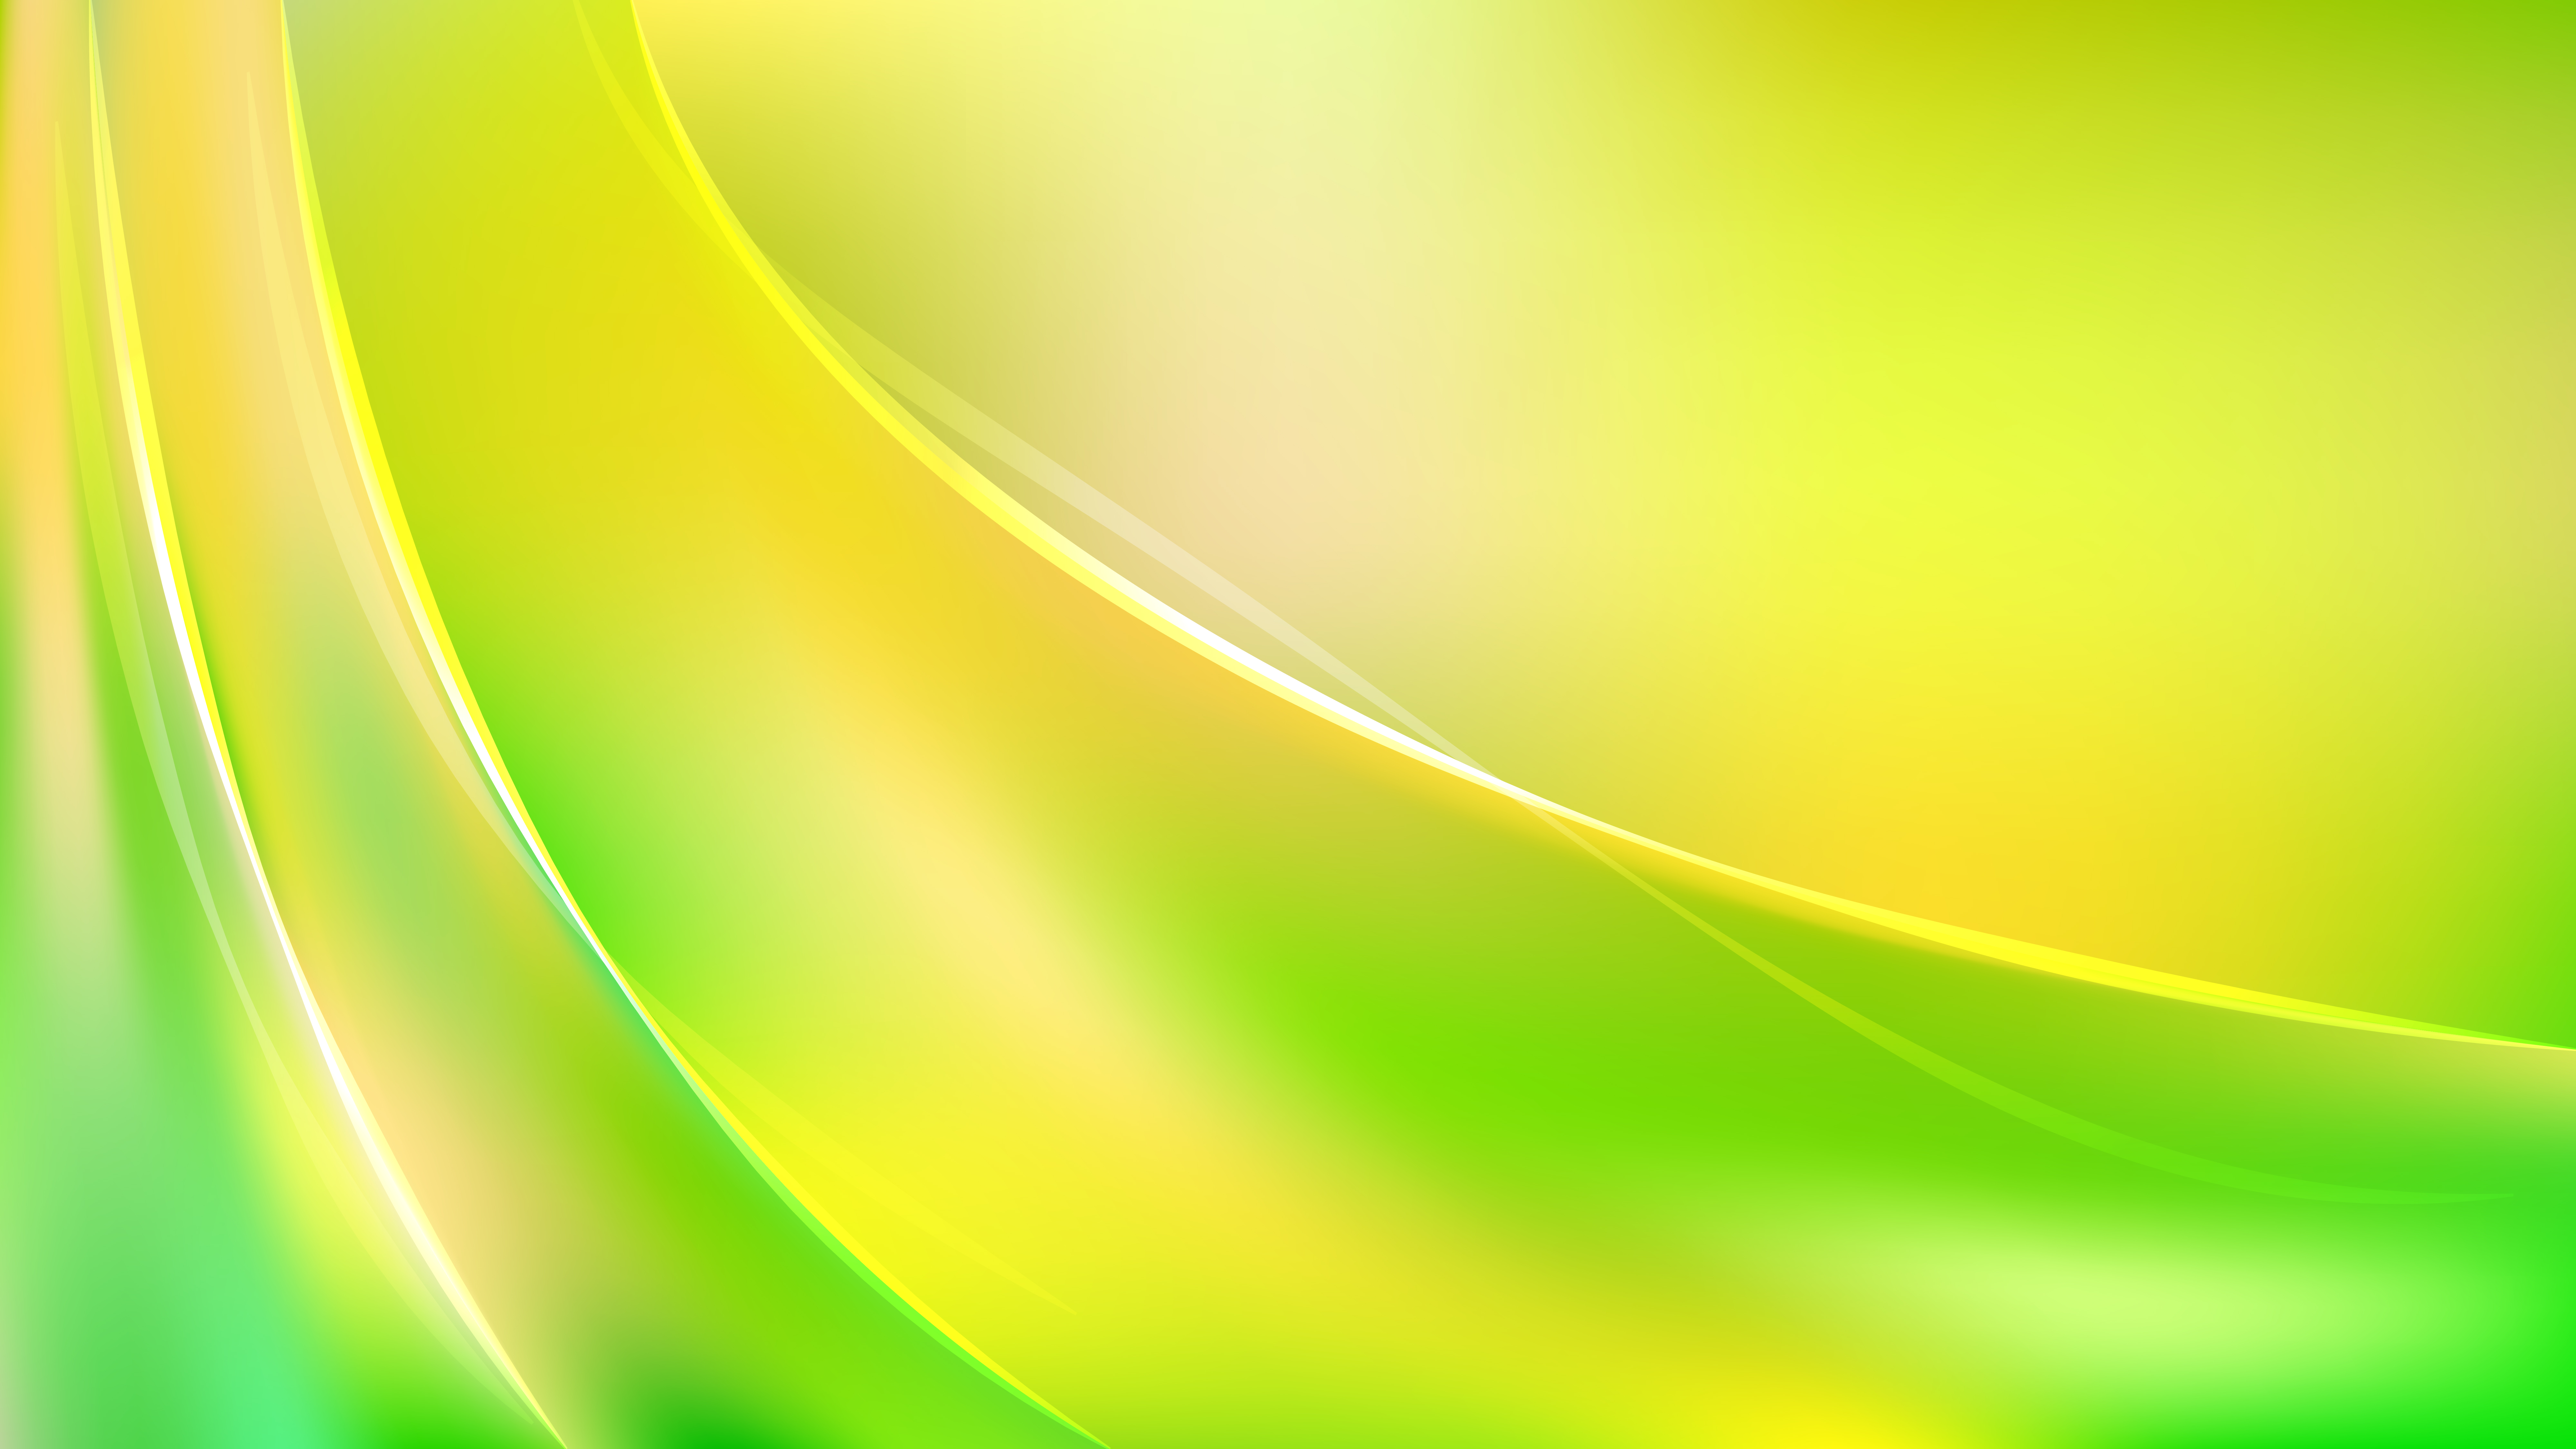 Free Abstract Glowing Green and Yellow Wave Background Image